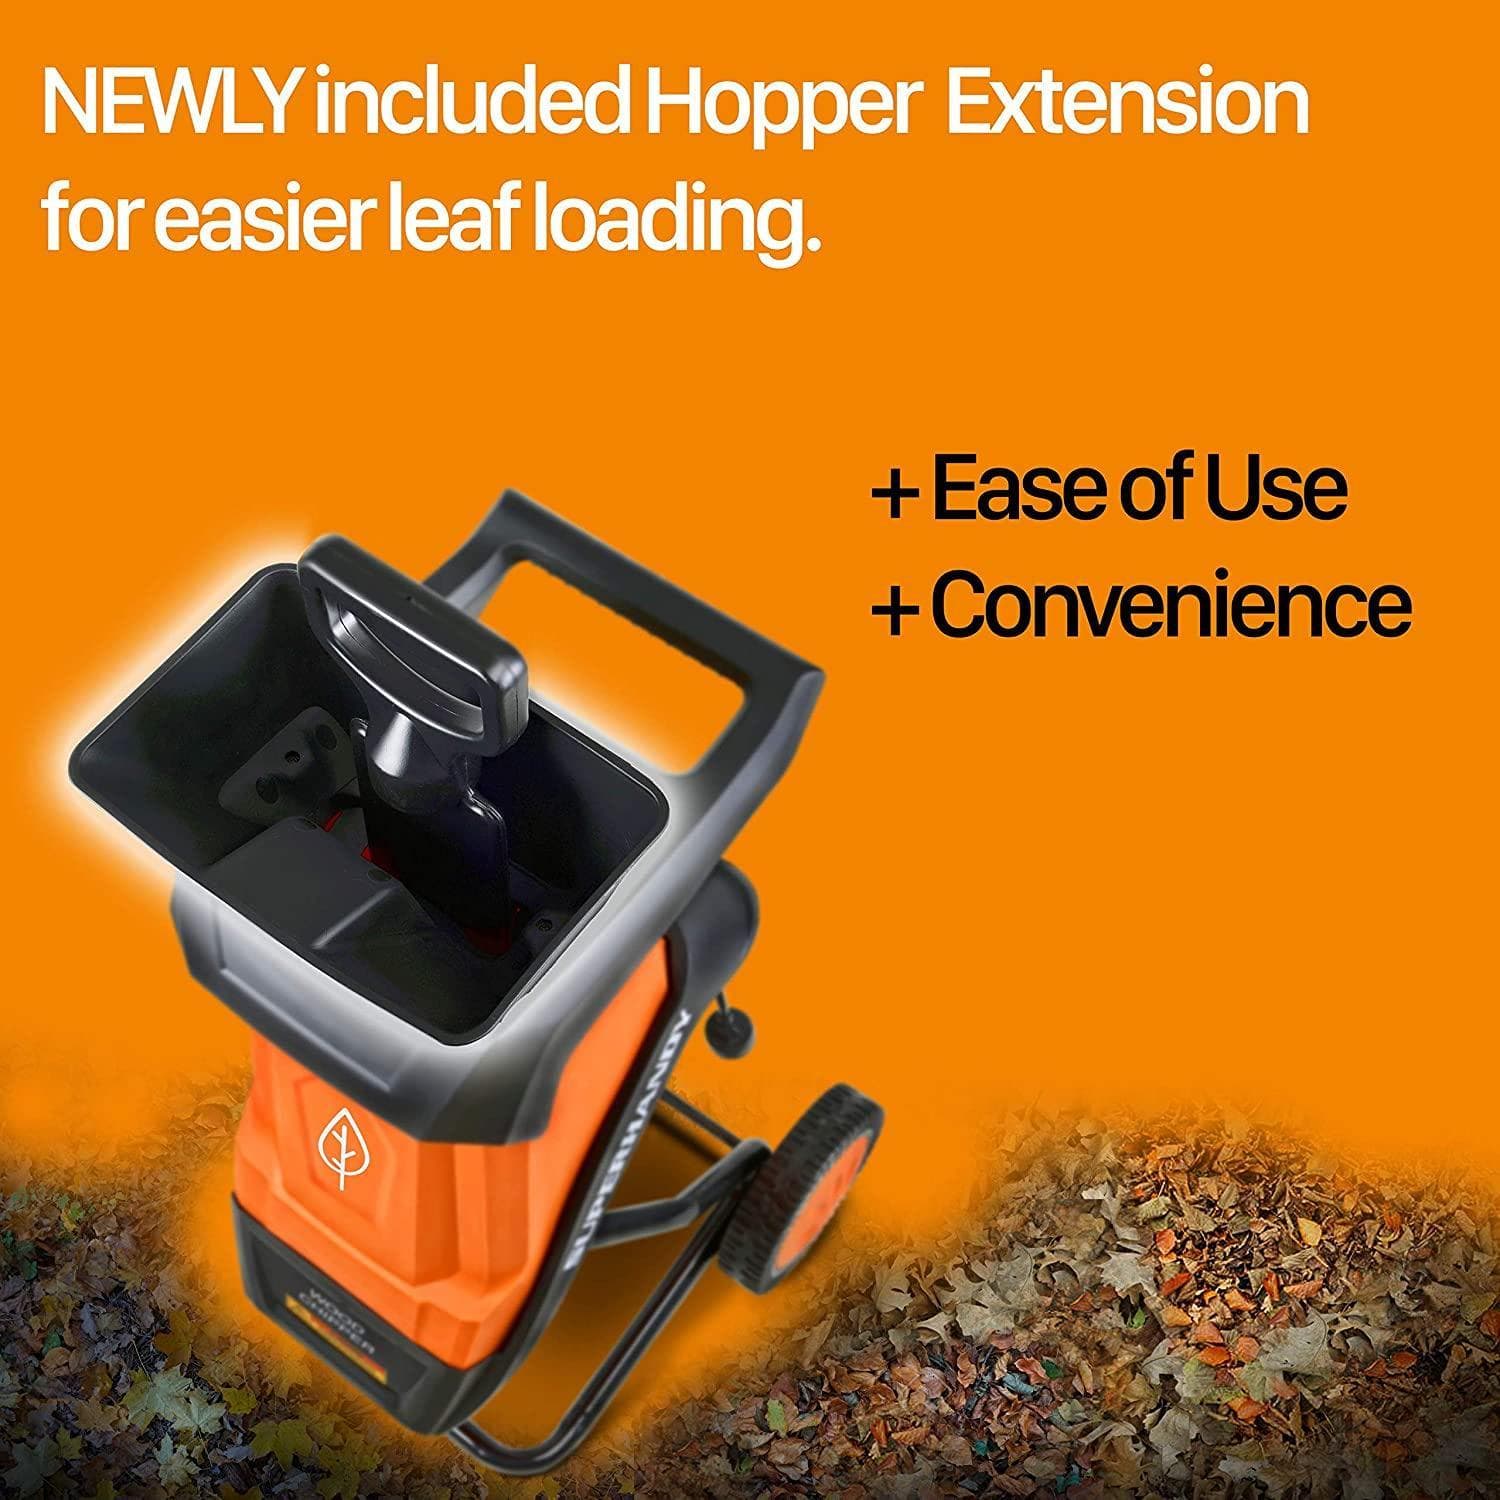 SuperHandy Light Duty Electric Wood Chipper - For Small Branches, Leaves, and Debris